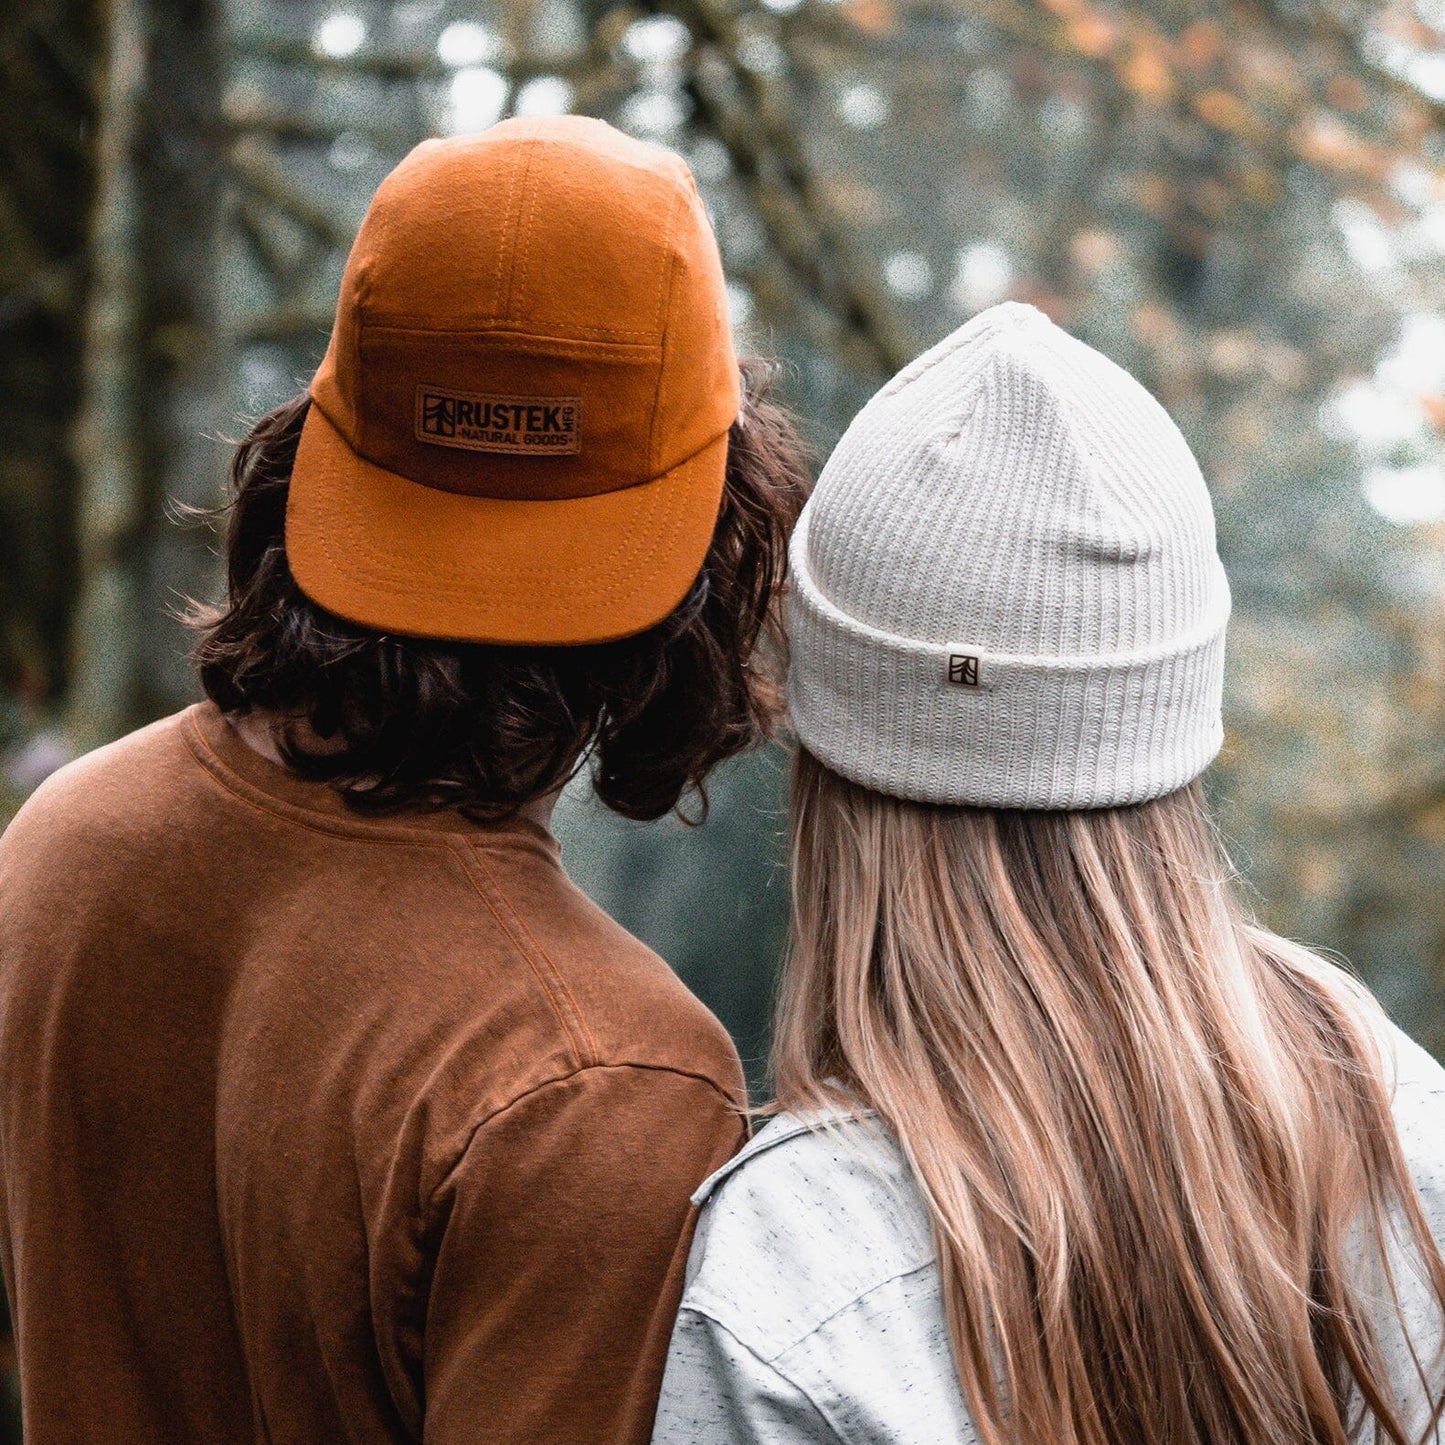 Canby Brushed Cotton Camp Cap | Orange